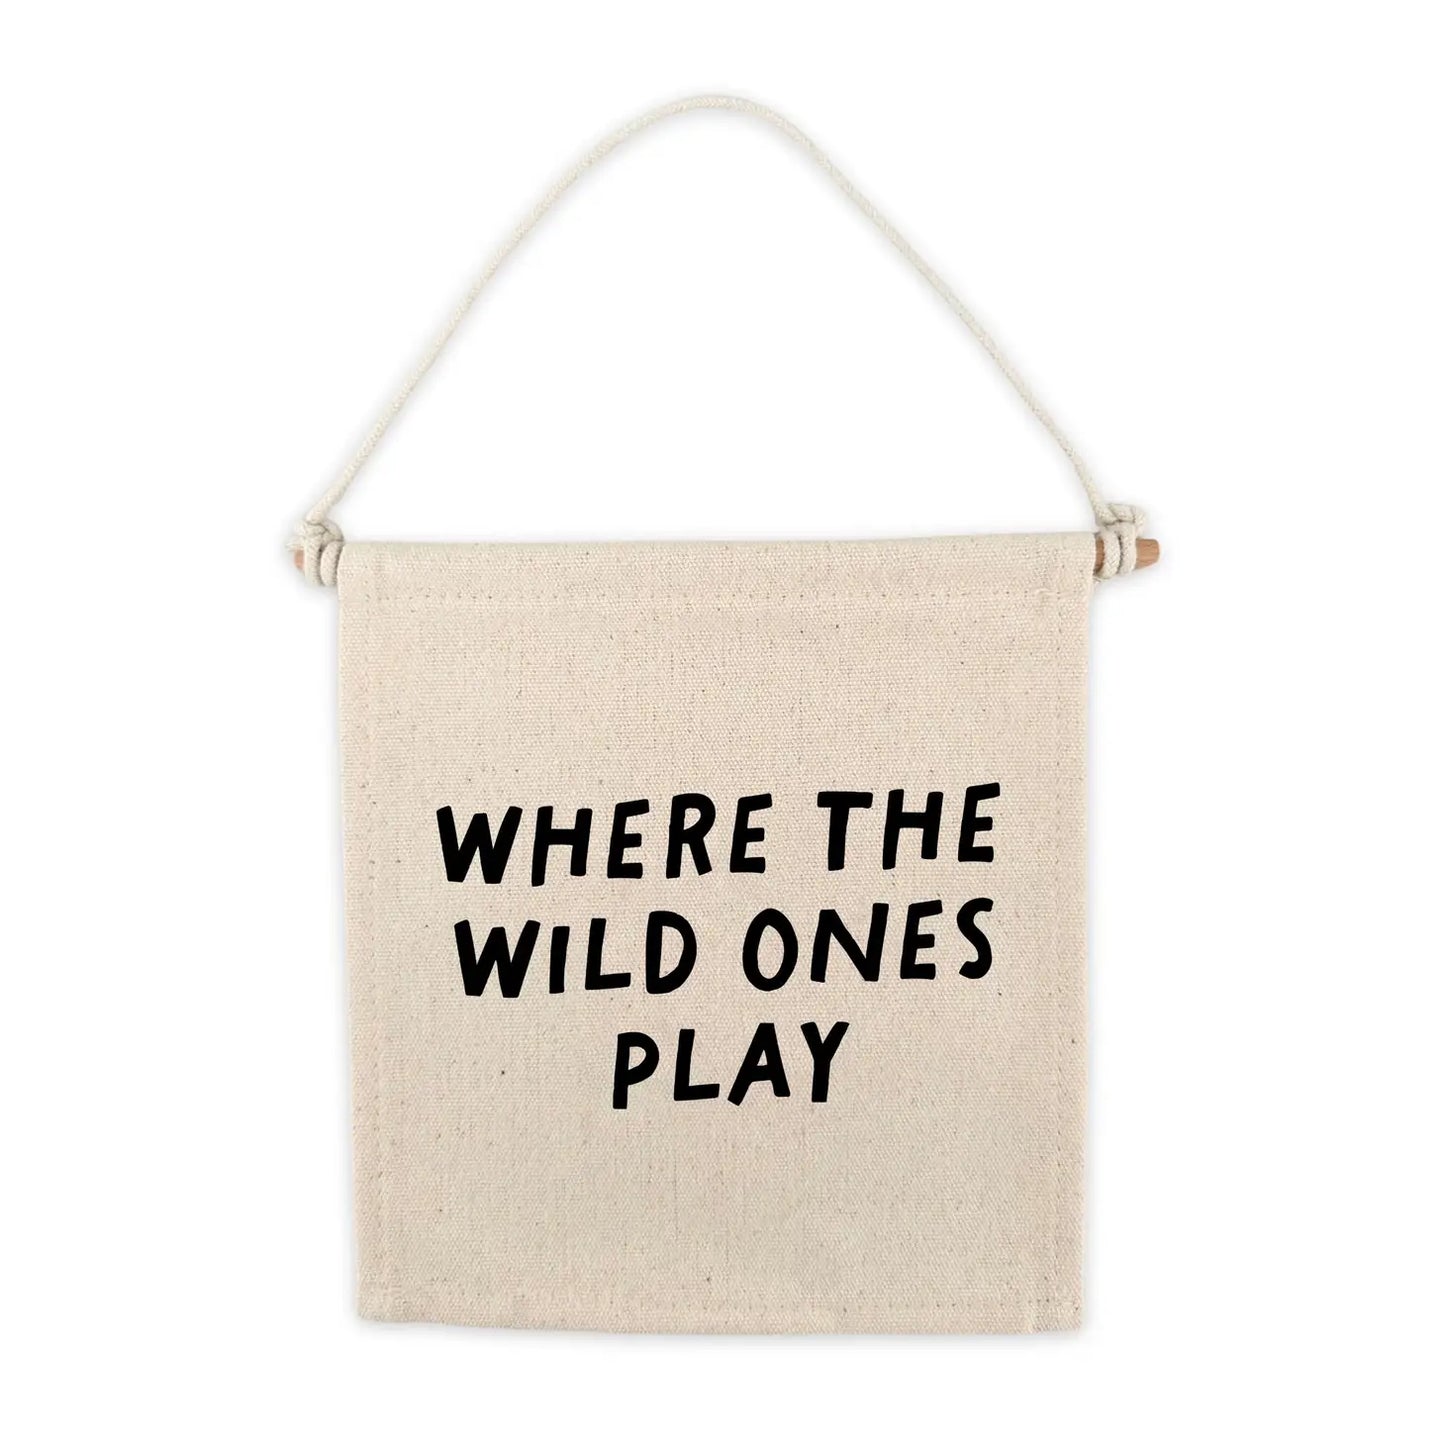 Cherrypick - Canvas Hang Sign (Where The Wild Ones Play)